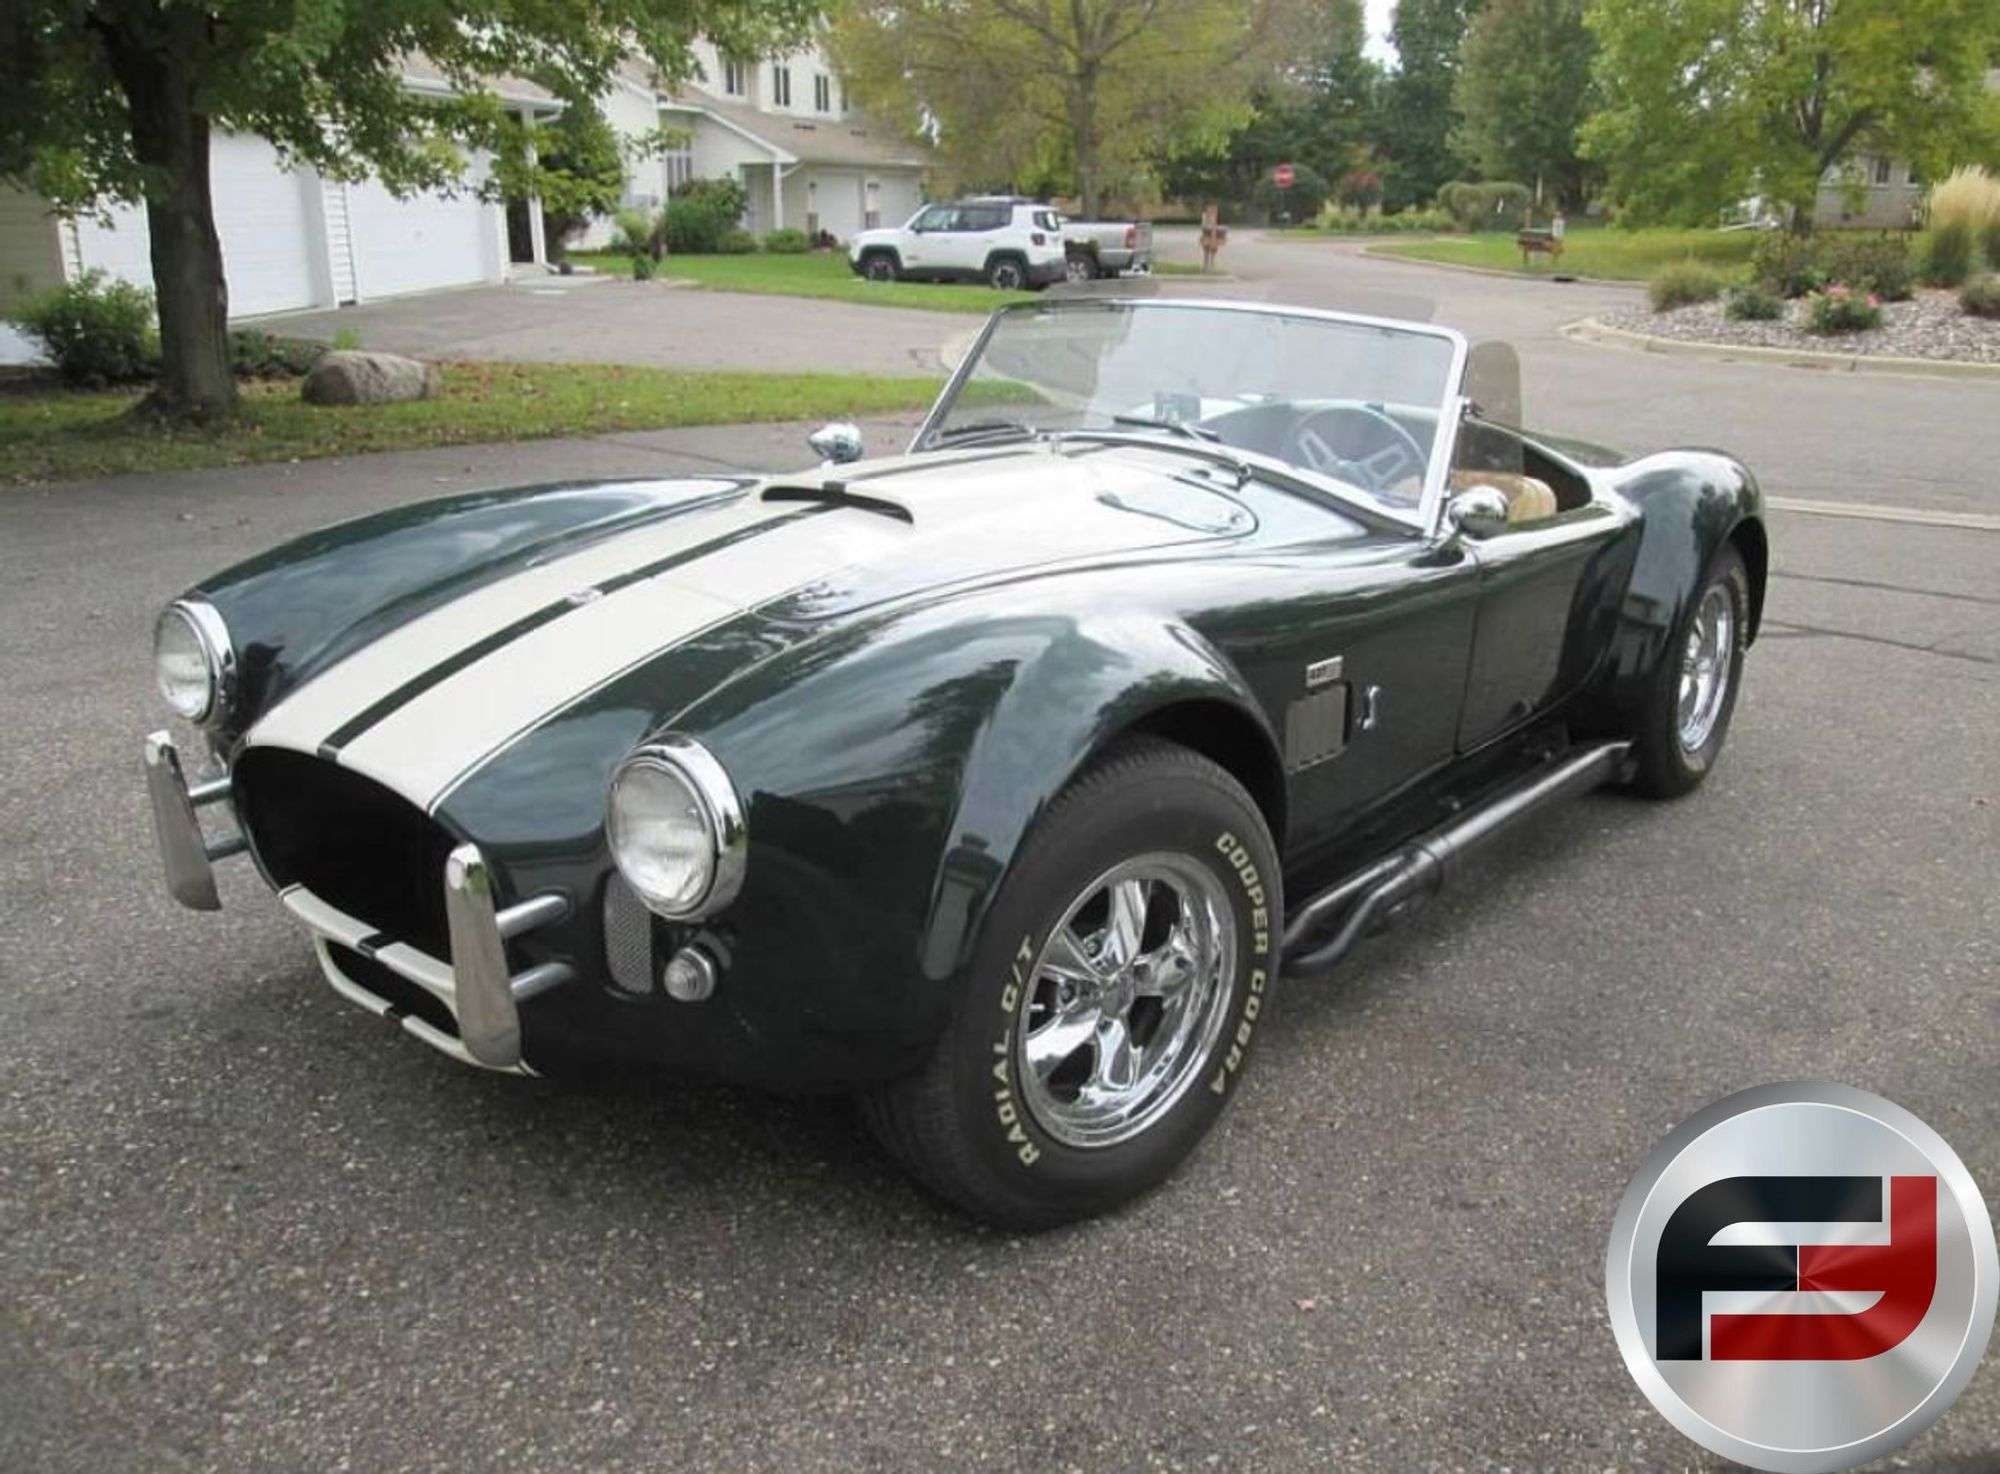 handpicked, sports, american, news, highlights, newsletter, muscle, client, classic, modern classic, europe, features, luxury, trucks, celebrity, off-road, german, freije & freije is selling two different cobras at its glencoe, mn auction this weekend-bid in person & online